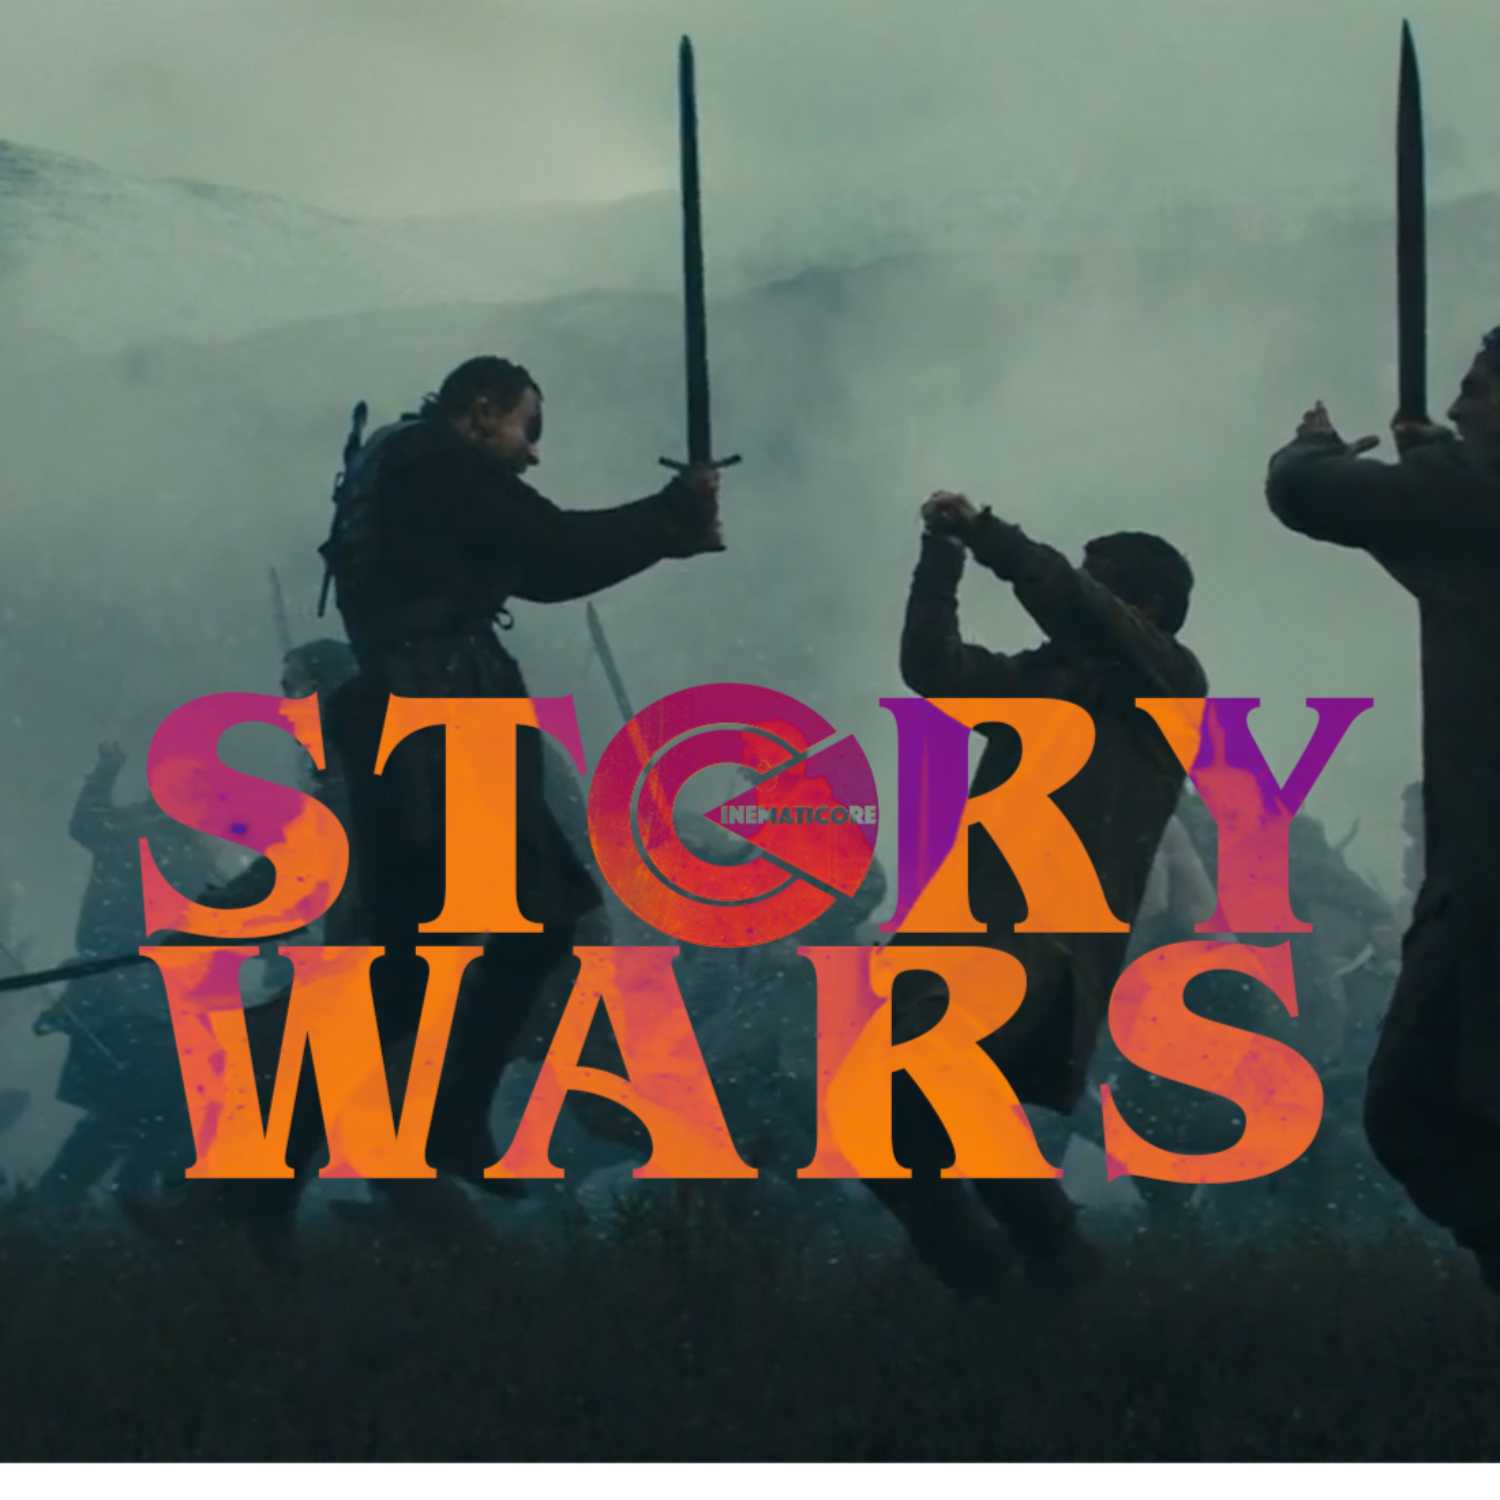 STORY BY NUMBERS 1: STORY WARS